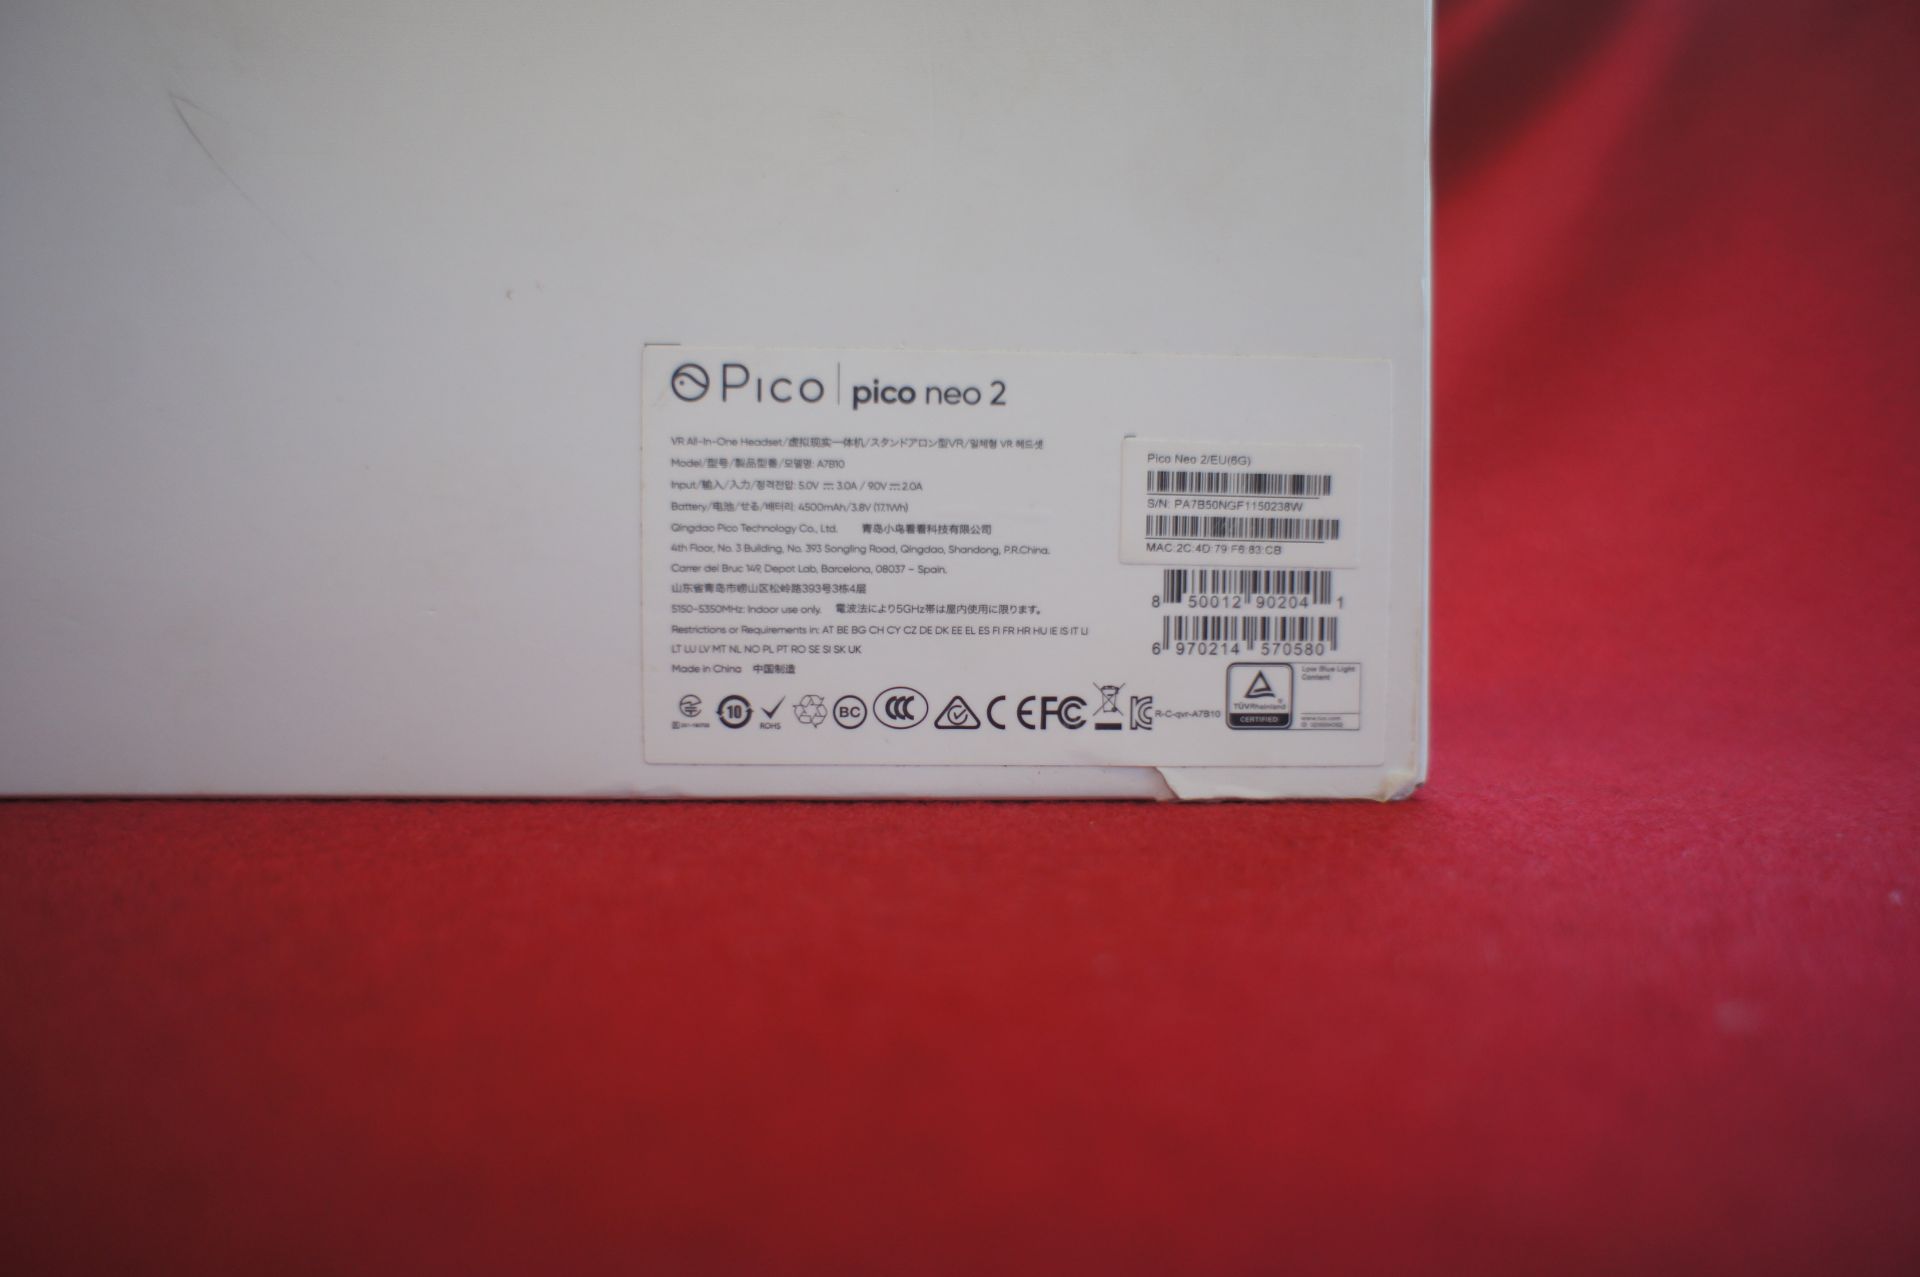 Pico Neo 2 VR headset, Asset Number B6, S/N PA7B50 - Image 2 of 3